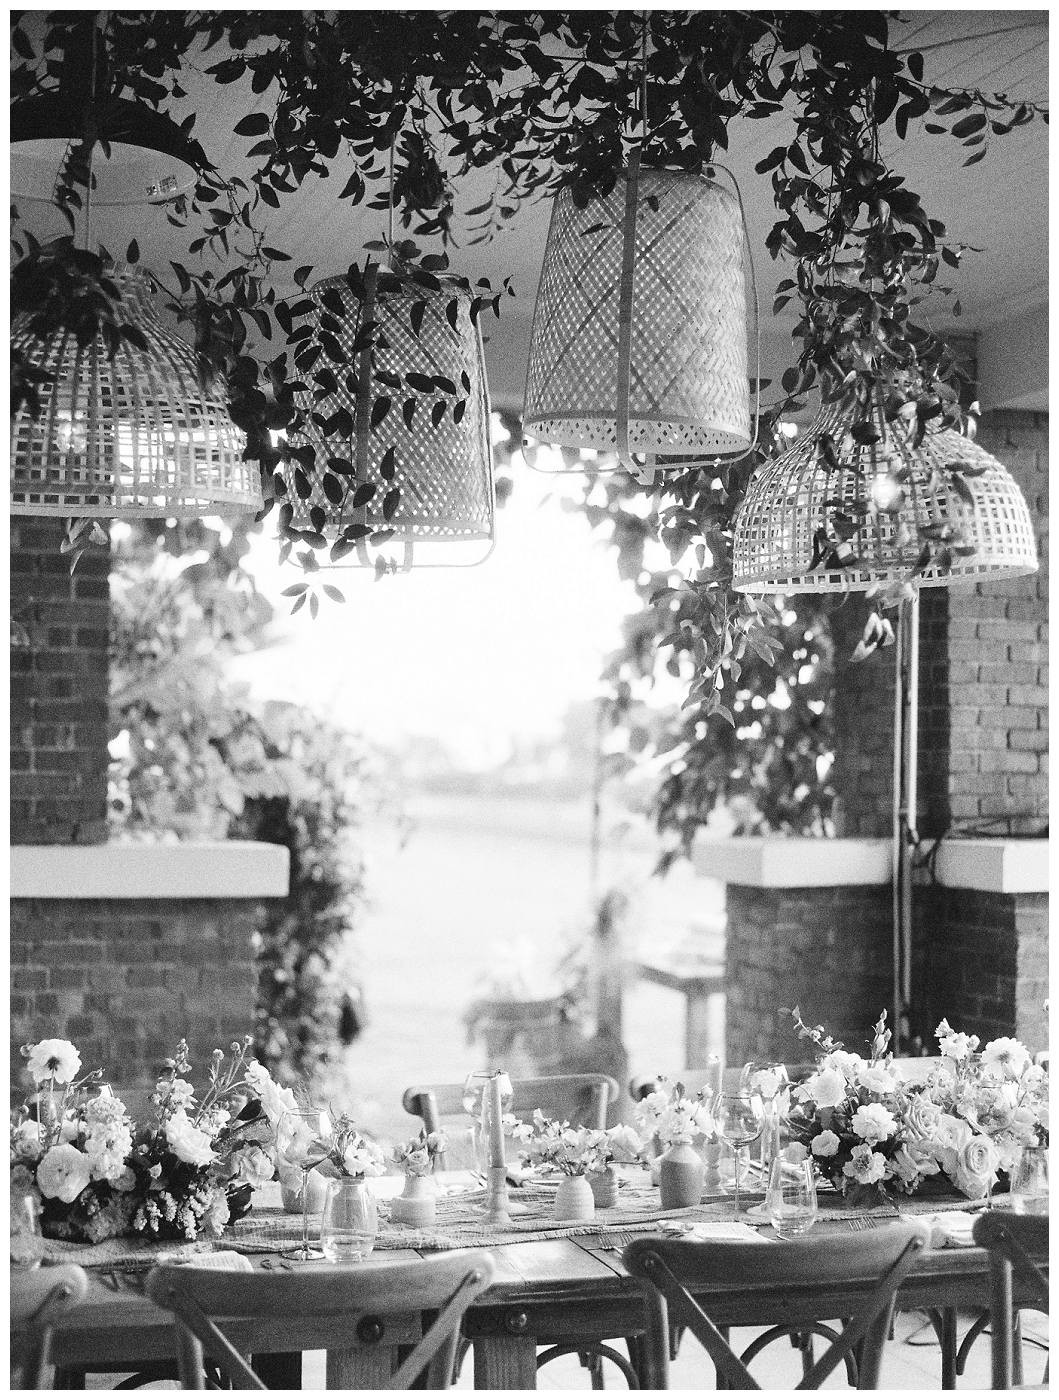 black and white photo of reception table with tapered candles and budvases outdoors, del mar surf station, farmhouse table, budvases ,outdoor reception, medium sized centerpieces, romantic weddings, daisies, toffee roses, berries, cream flowers, white flowers, hydrangeas, majolica roses, explosion grass, outdoor wedding, covid wedding, san diego wedding florist, southern california elopement florist, socal florist, best wedding florist san diego ca, best wedding florist southern california, los angeles wedding florist, top rated wedding florist in california, del mar san diego, blush tapered candles, blush table runner, budvases